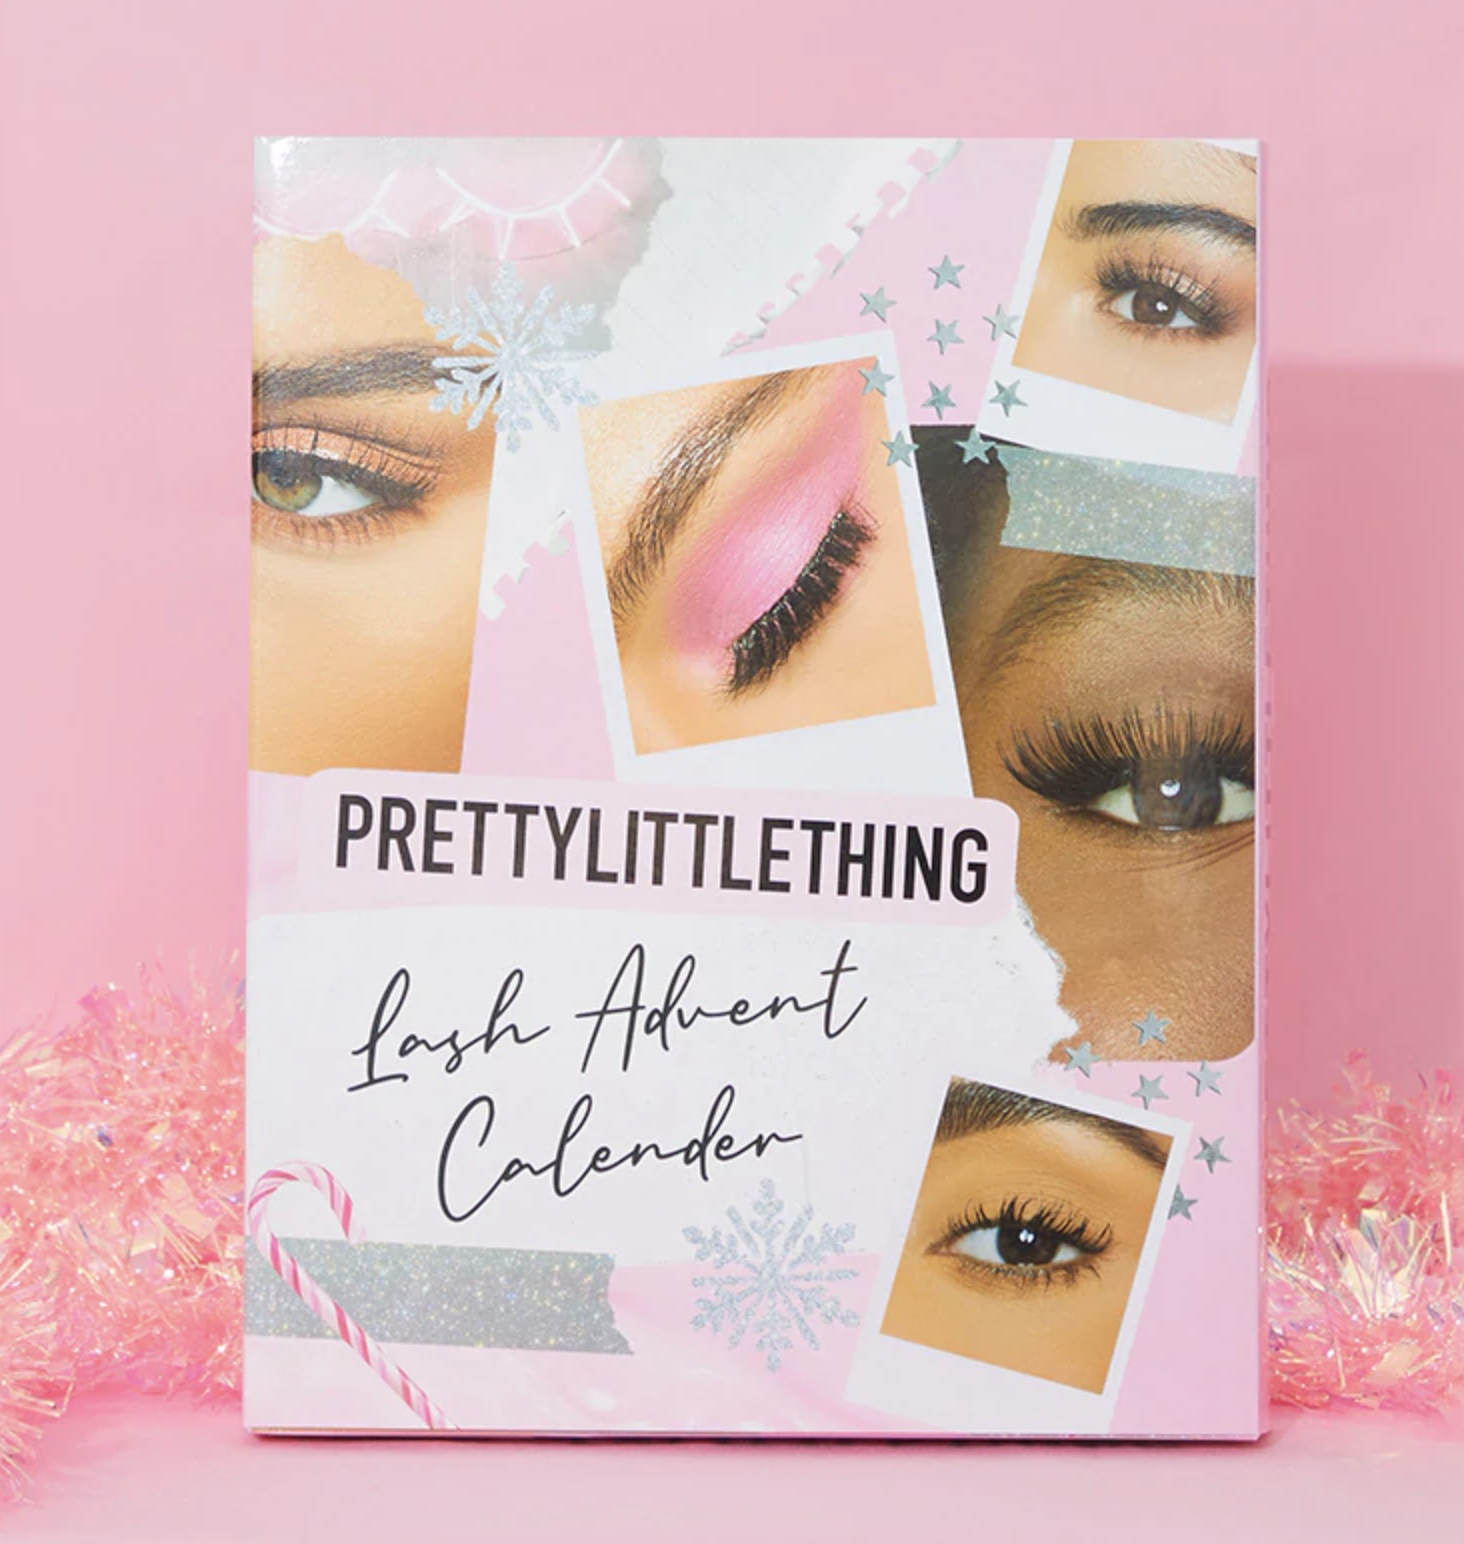 PrettyLittleThing 2020 Lash Advent Calendar Available Now + Full